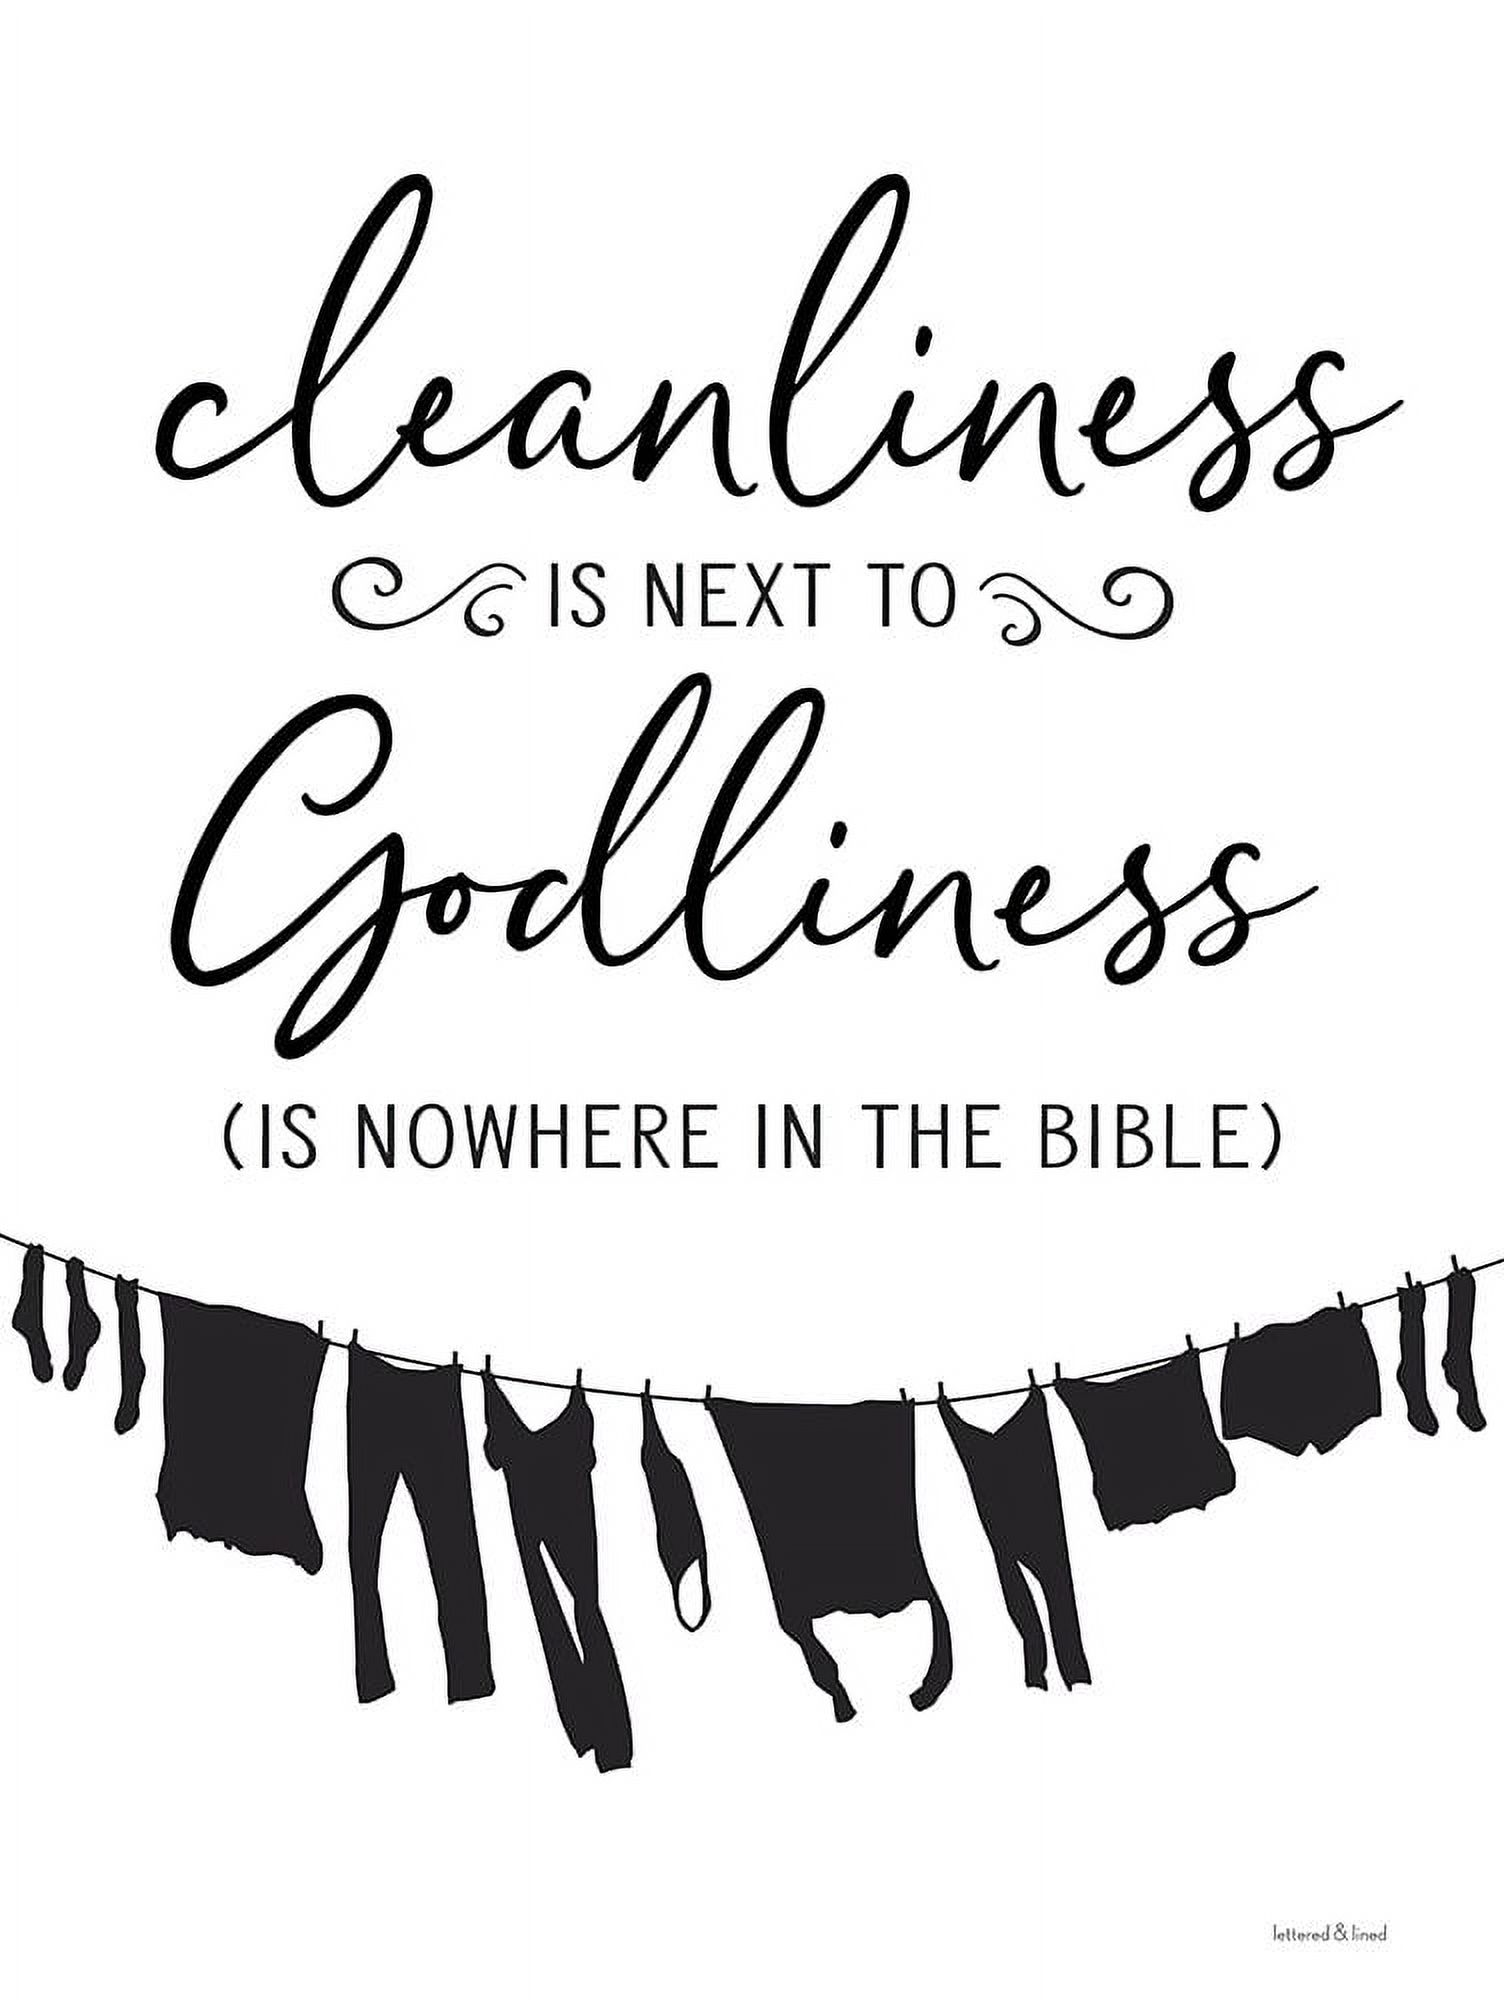 Next　lettered　lined　And　x　Godliness　to　is　(24　36)　Cleanliness　by